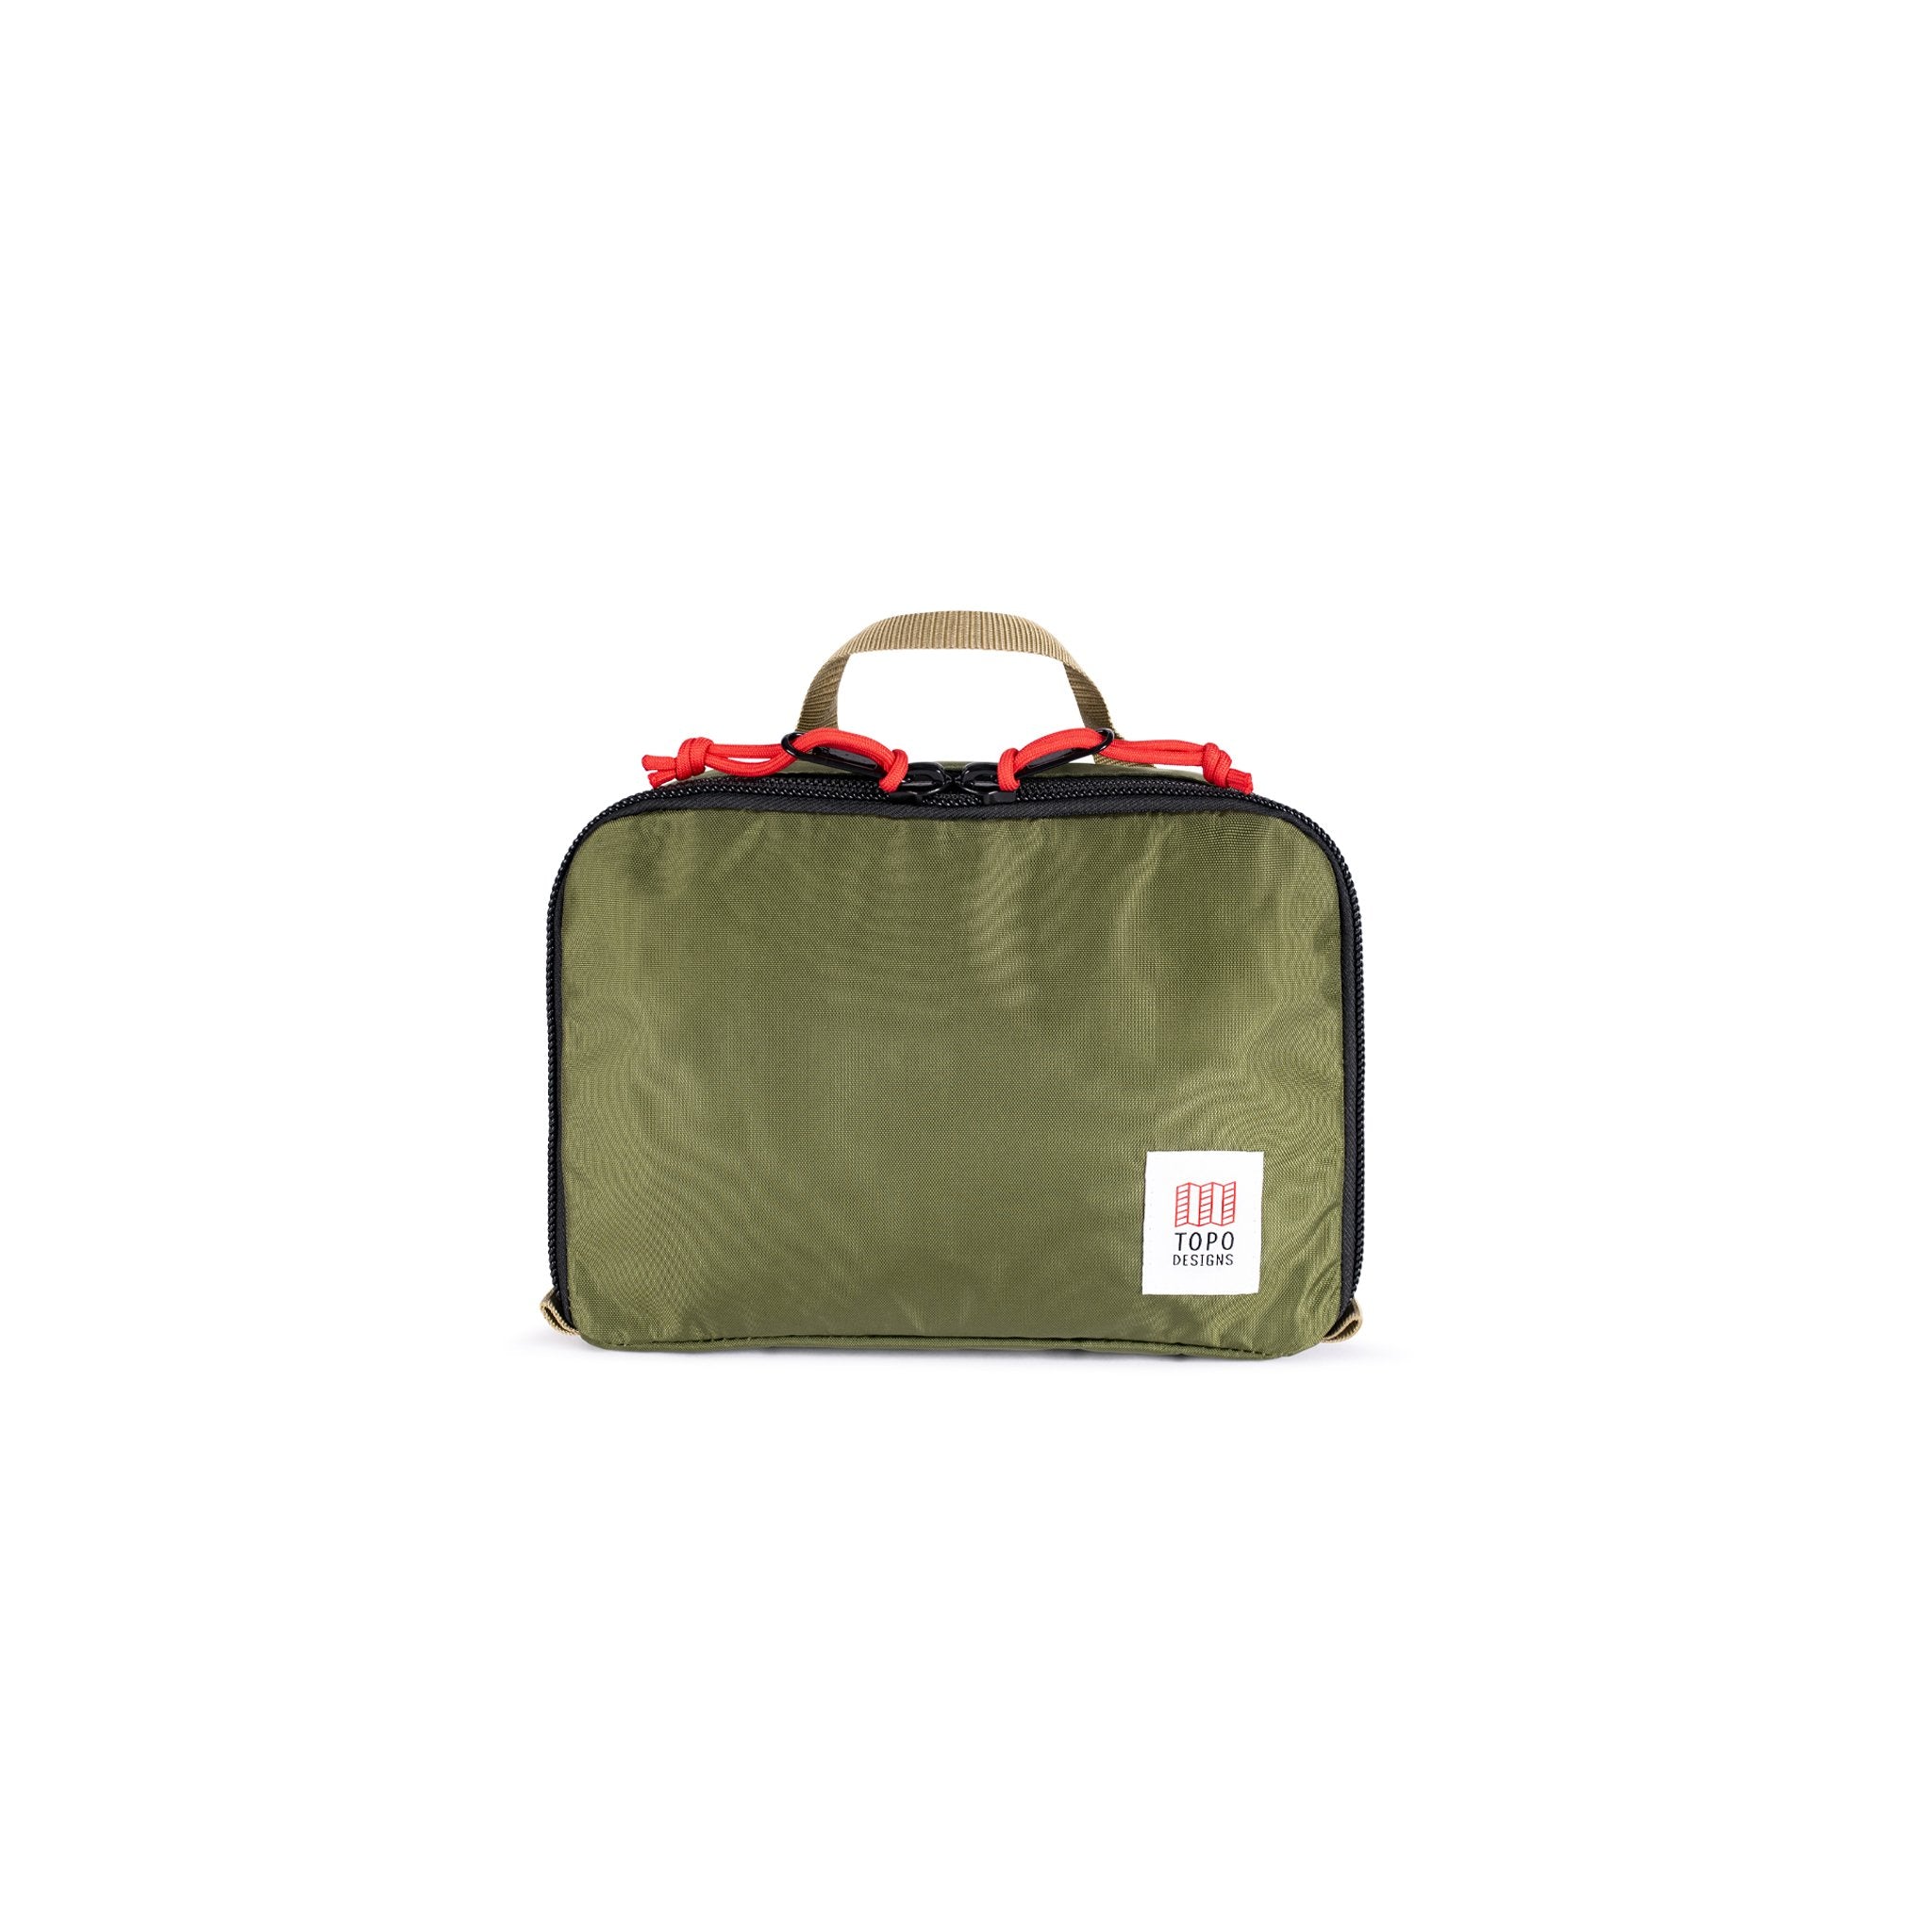 Front product shot of Topo Designs Pack Bag 5L in "Olive" green.